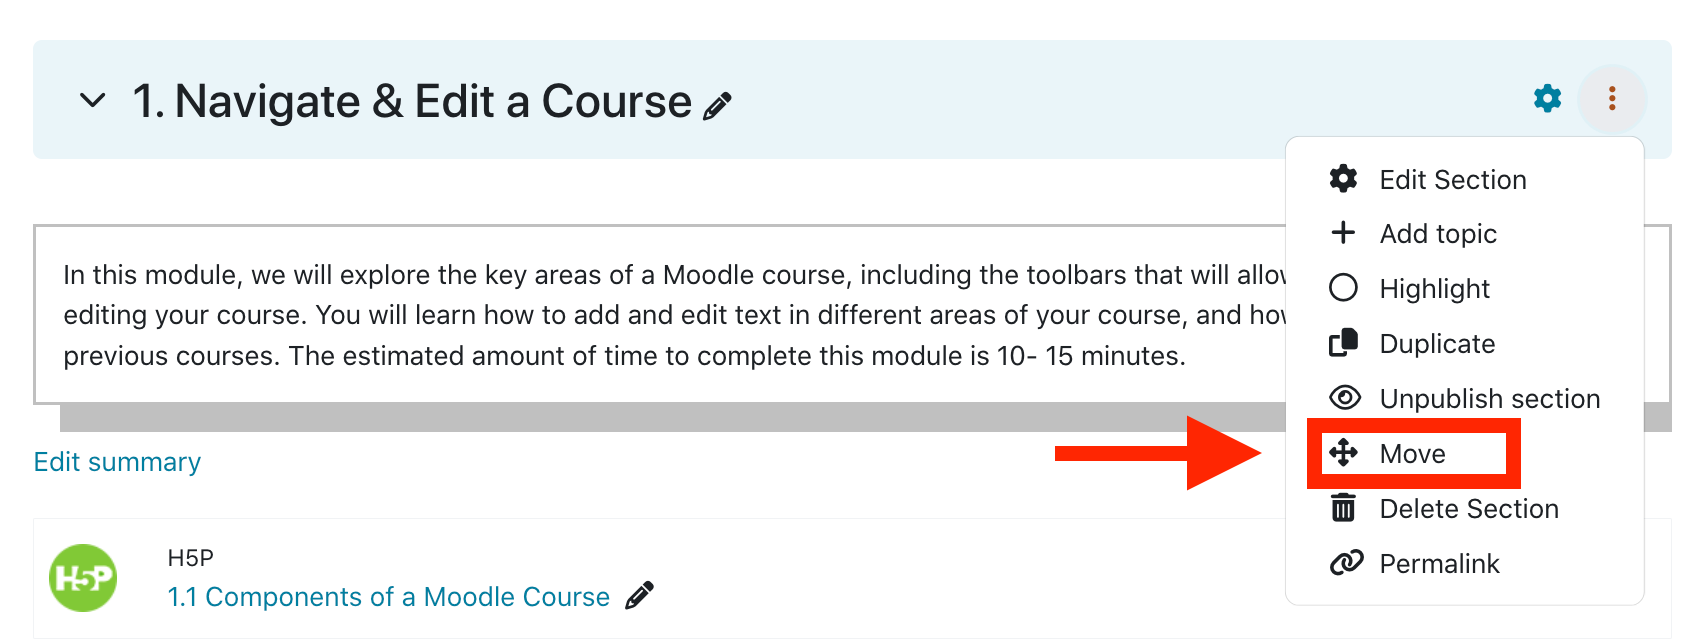 Screenshot of a Moodle course. The "Move" function is being highlighted from the item settings drop-down menu.